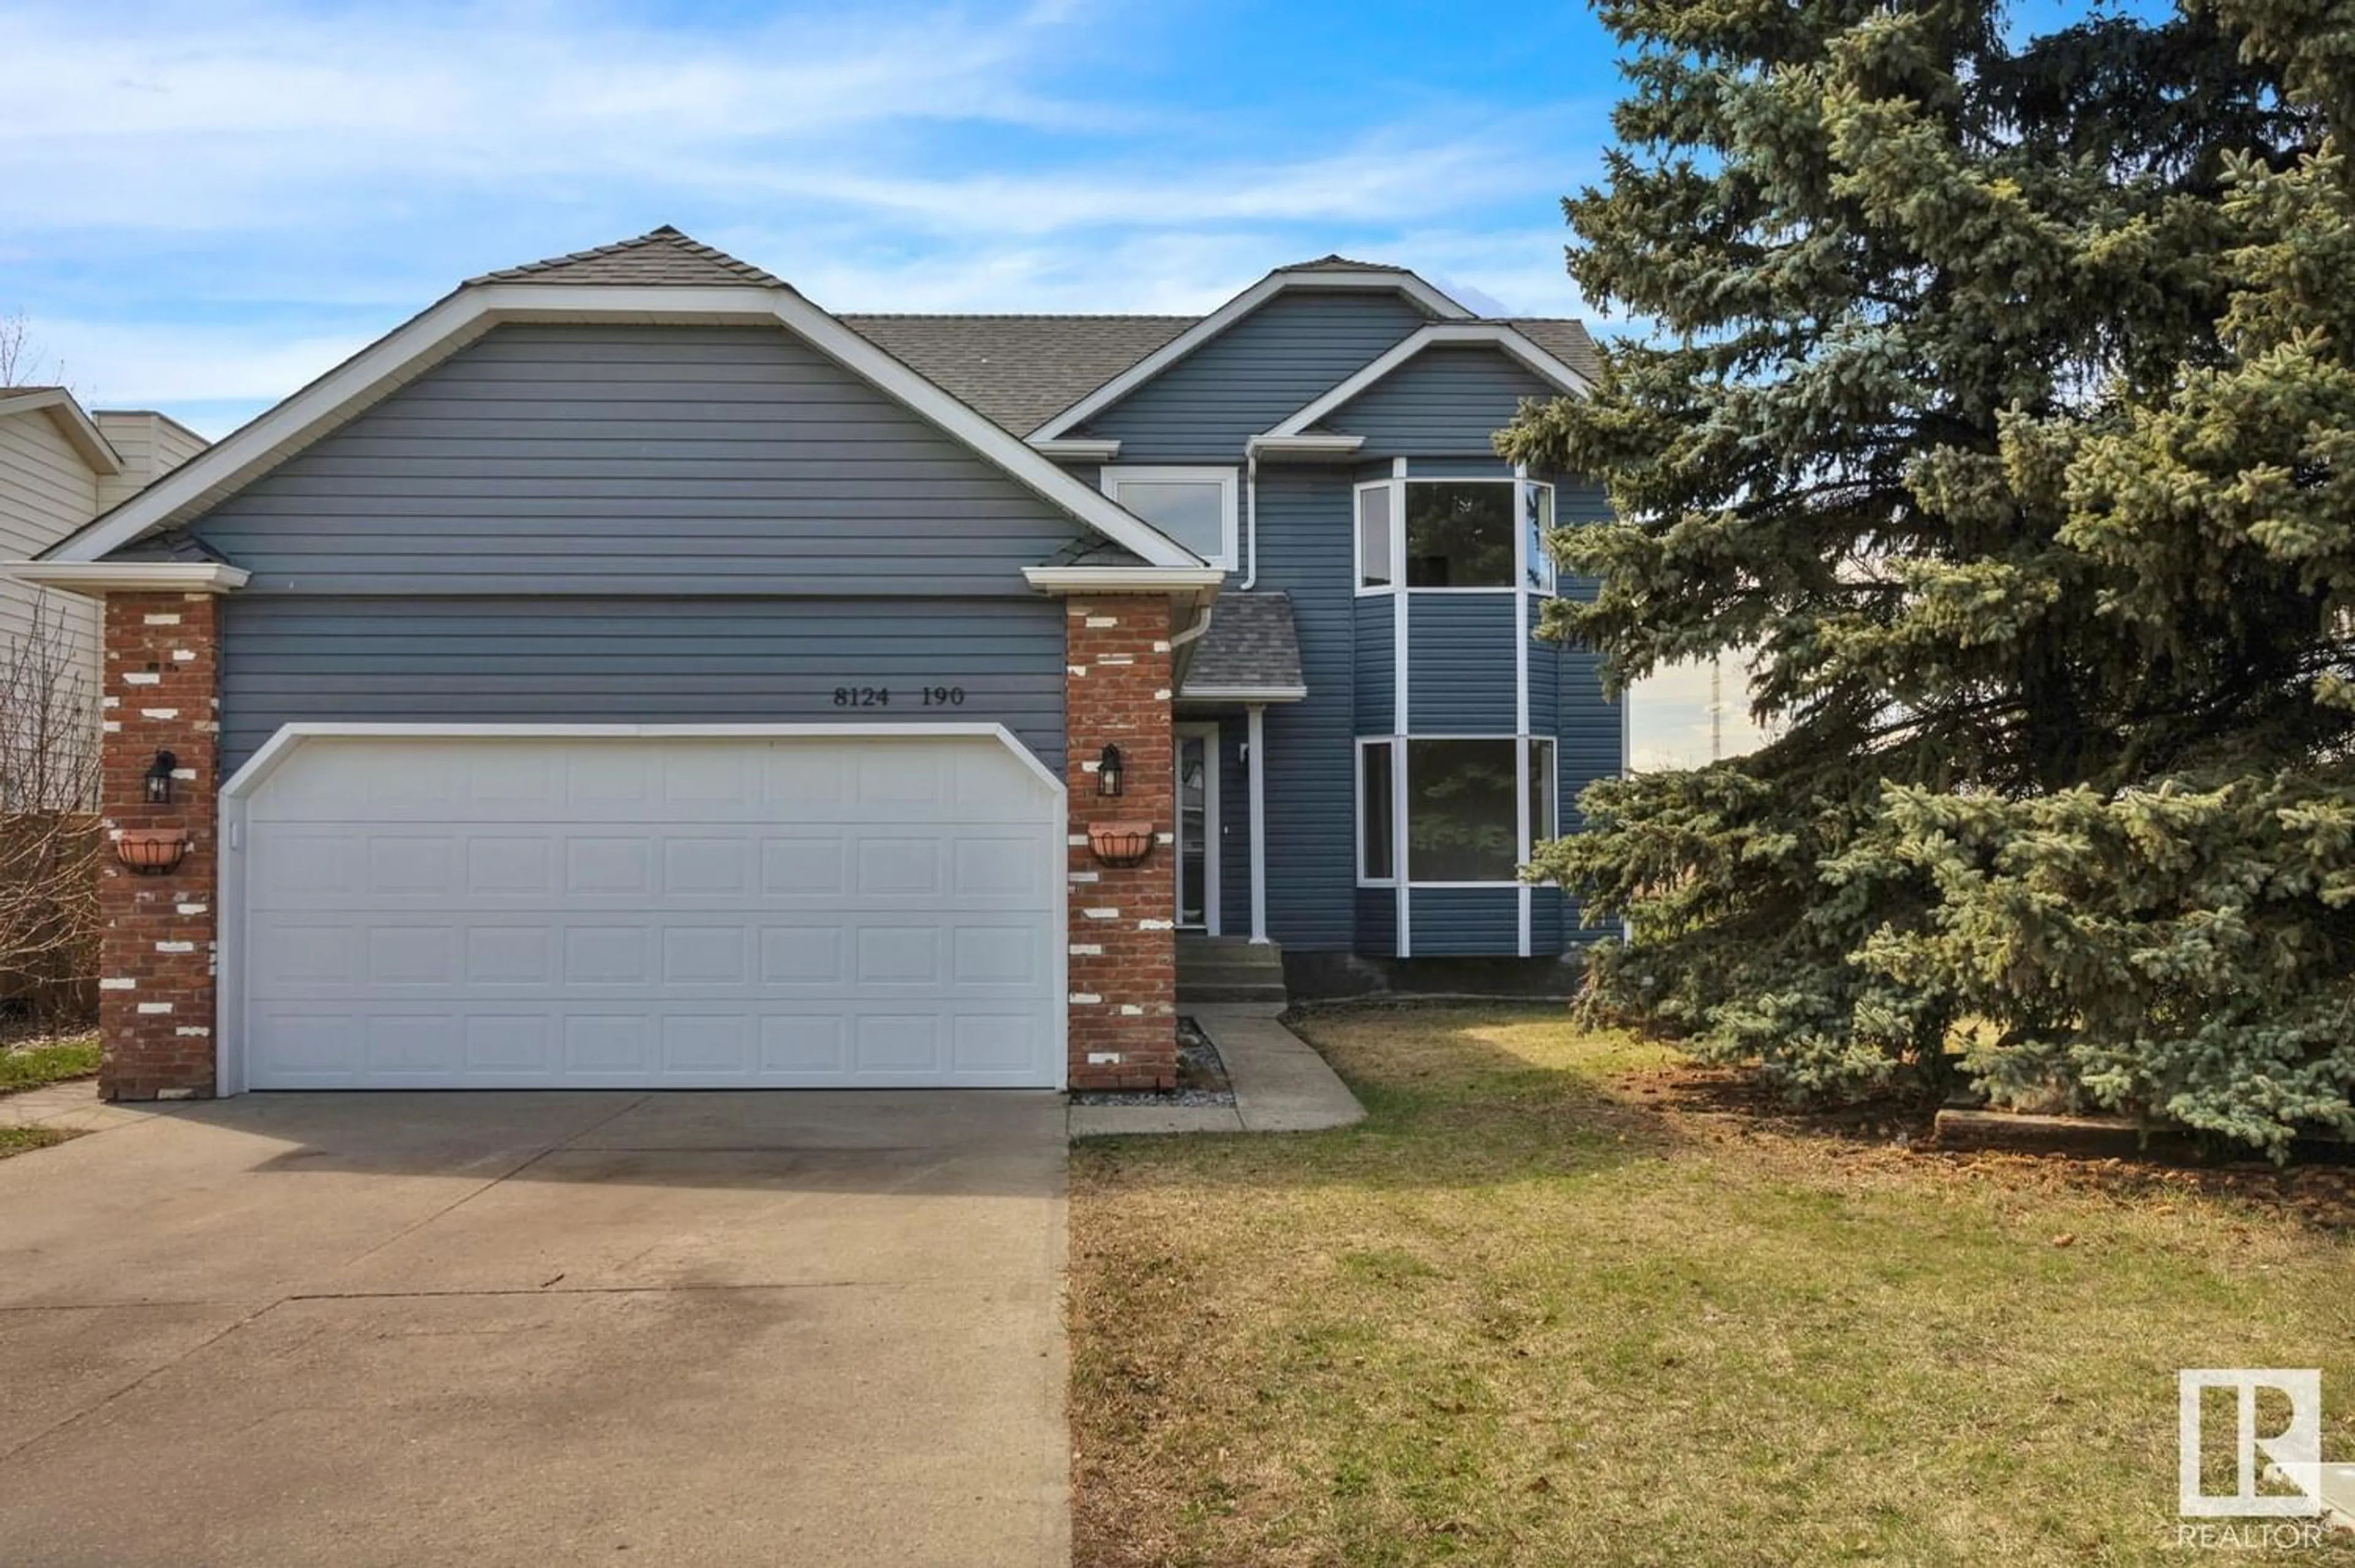 Frontside or backside of a home for 8124 190 ST NW, Edmonton Alberta T5T5C7